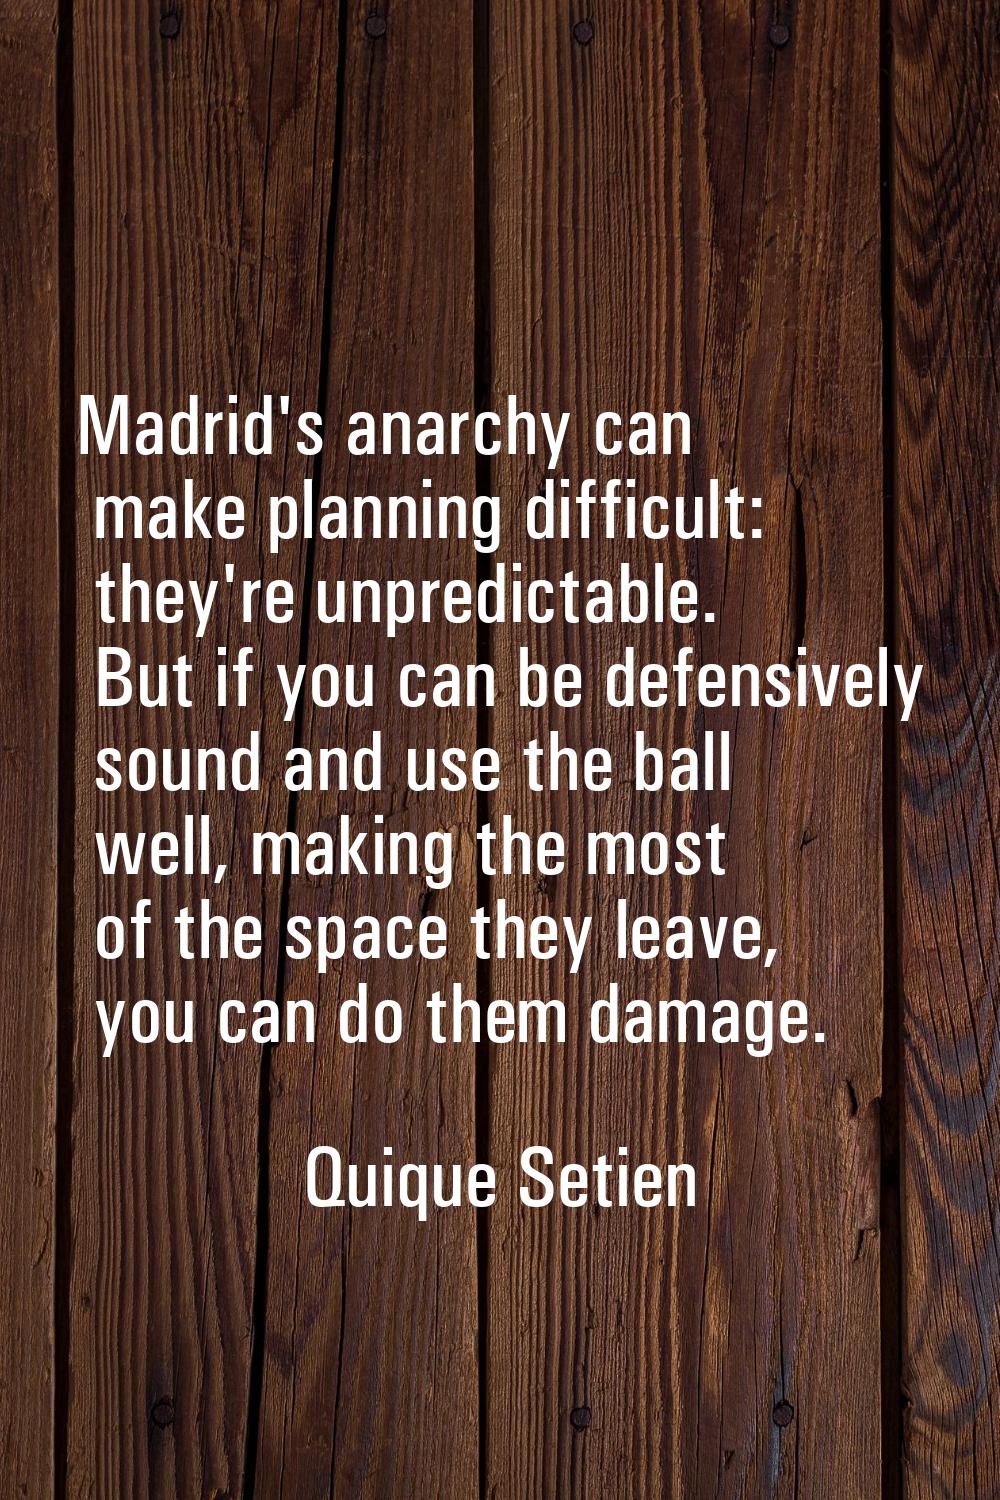 Madrid's anarchy can make planning difficult: they're unpredictable. But if you can be defensively 